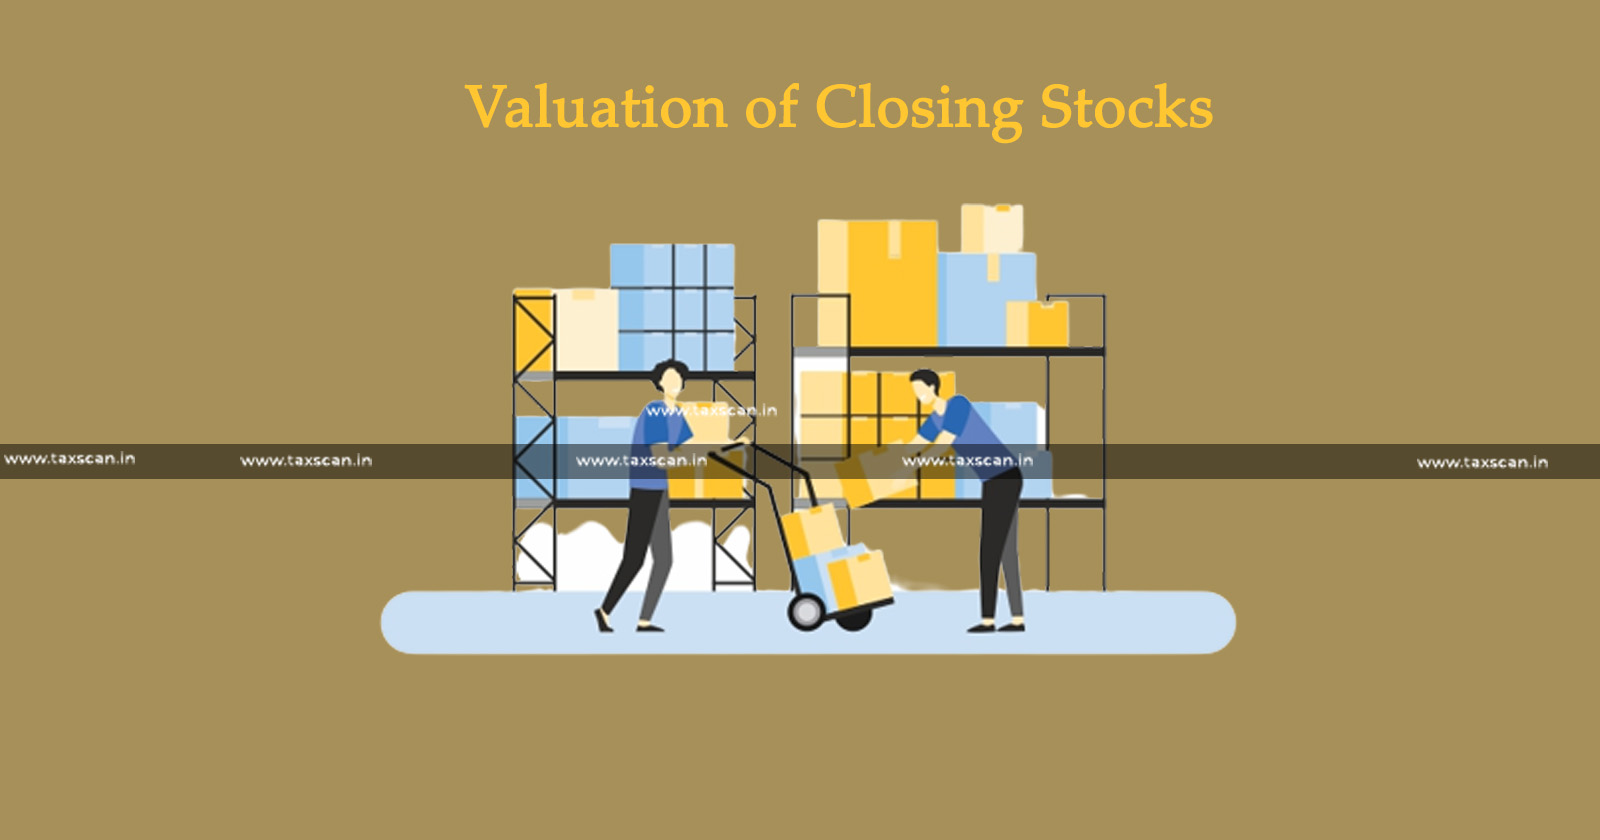 Losses - ITAT Deletes Addition on Valuation of Closing Stocks -Valuation of Closing Stocks - Closing Stocks - Valuation - ITAT Deletes Addition- taxscan